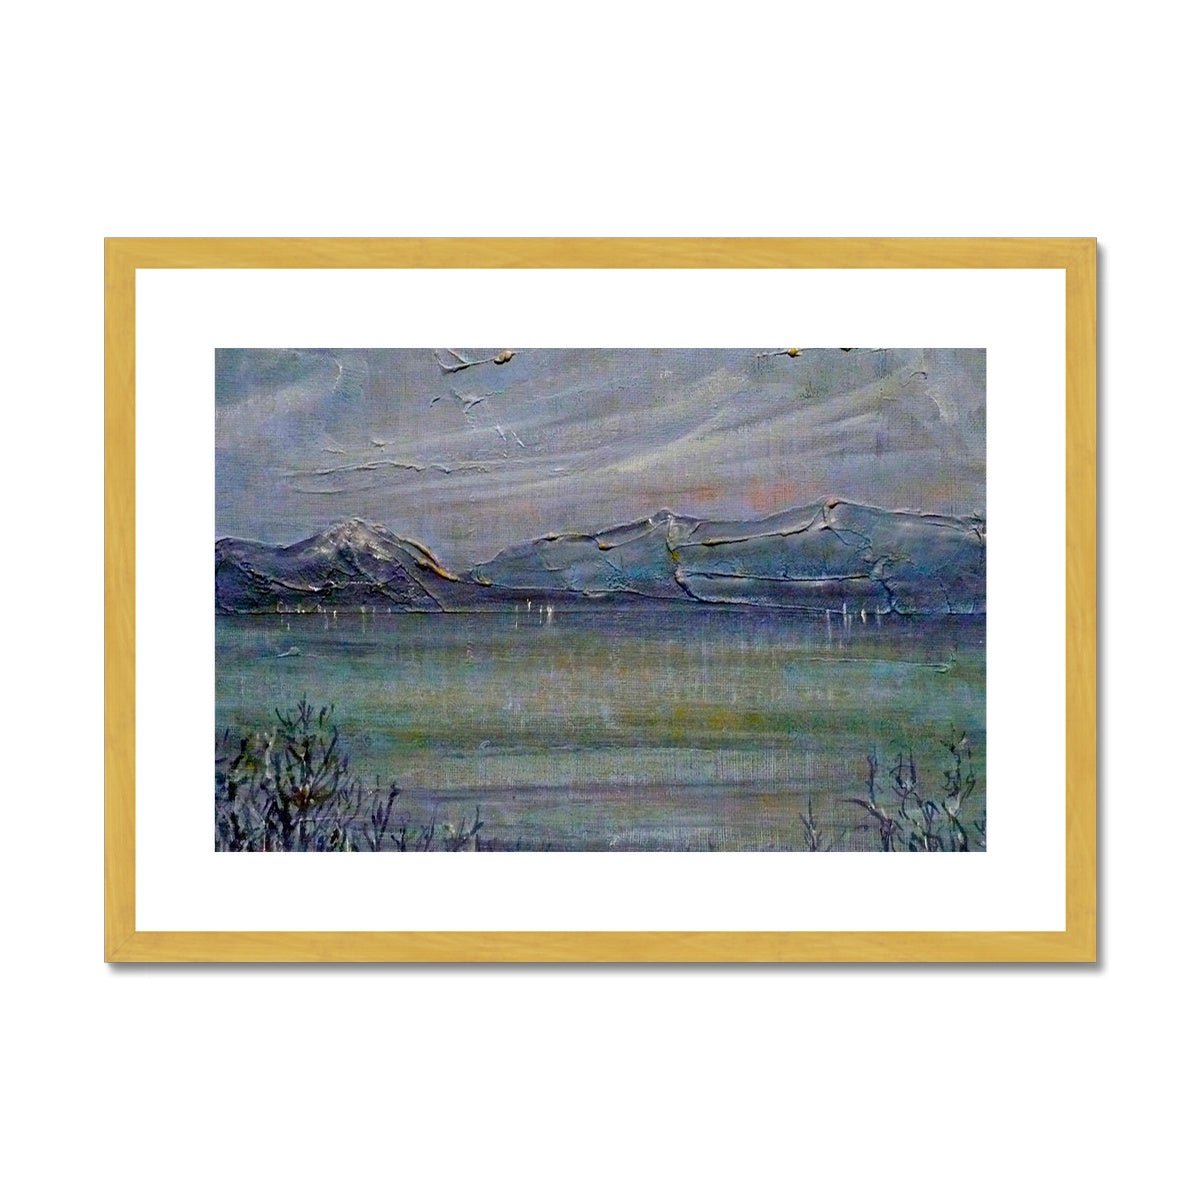 Loch Morlich Moonlight Painting | Antique Framed & Mounted Prints From Scotland-Antique Framed & Mounted Prints-Scottish Lochs & Mountains Art Gallery-A2 Landscape-Gold Frame-Paintings, Prints, Homeware, Art Gifts From Scotland By Scottish Artist Kevin Hunter